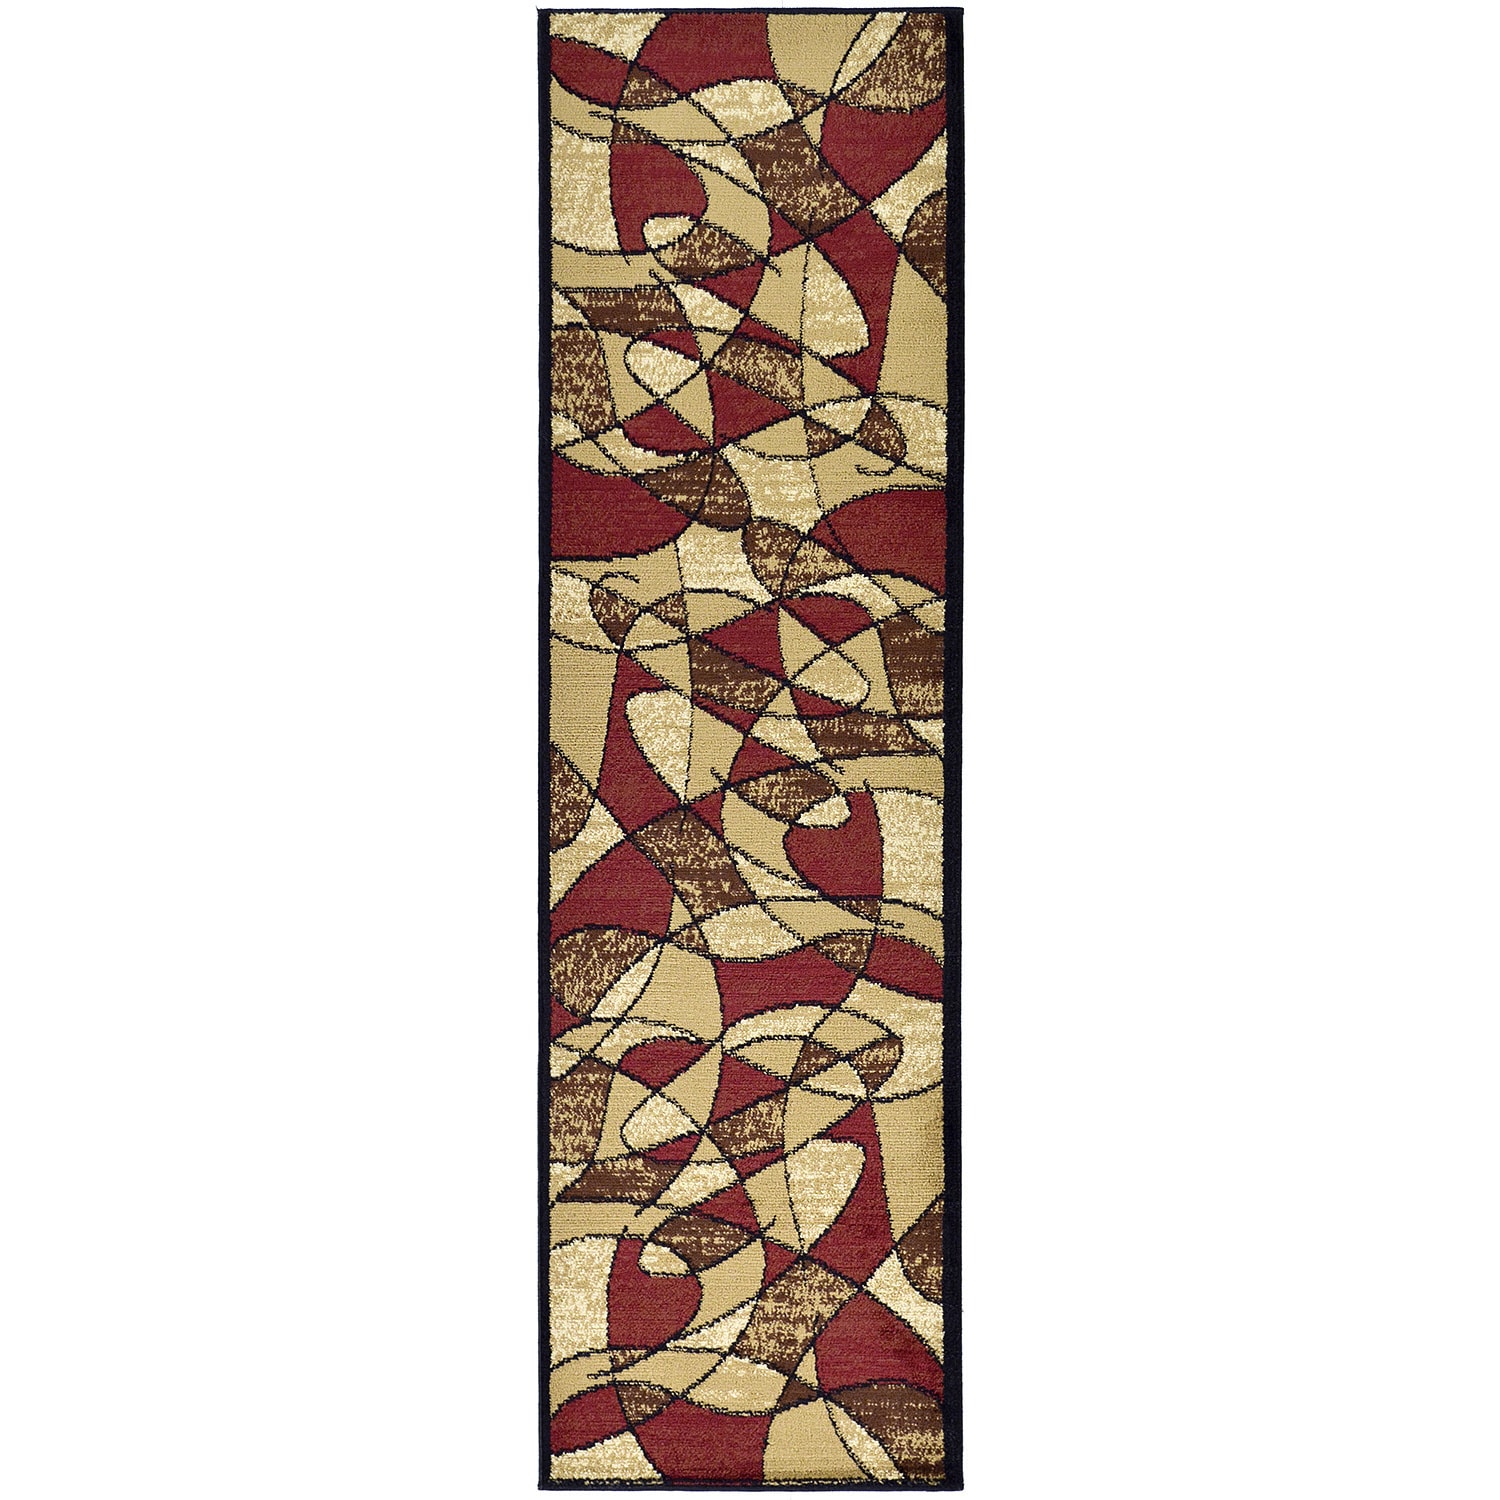 Abstract Design Multicolor Runner Rug (2x7)